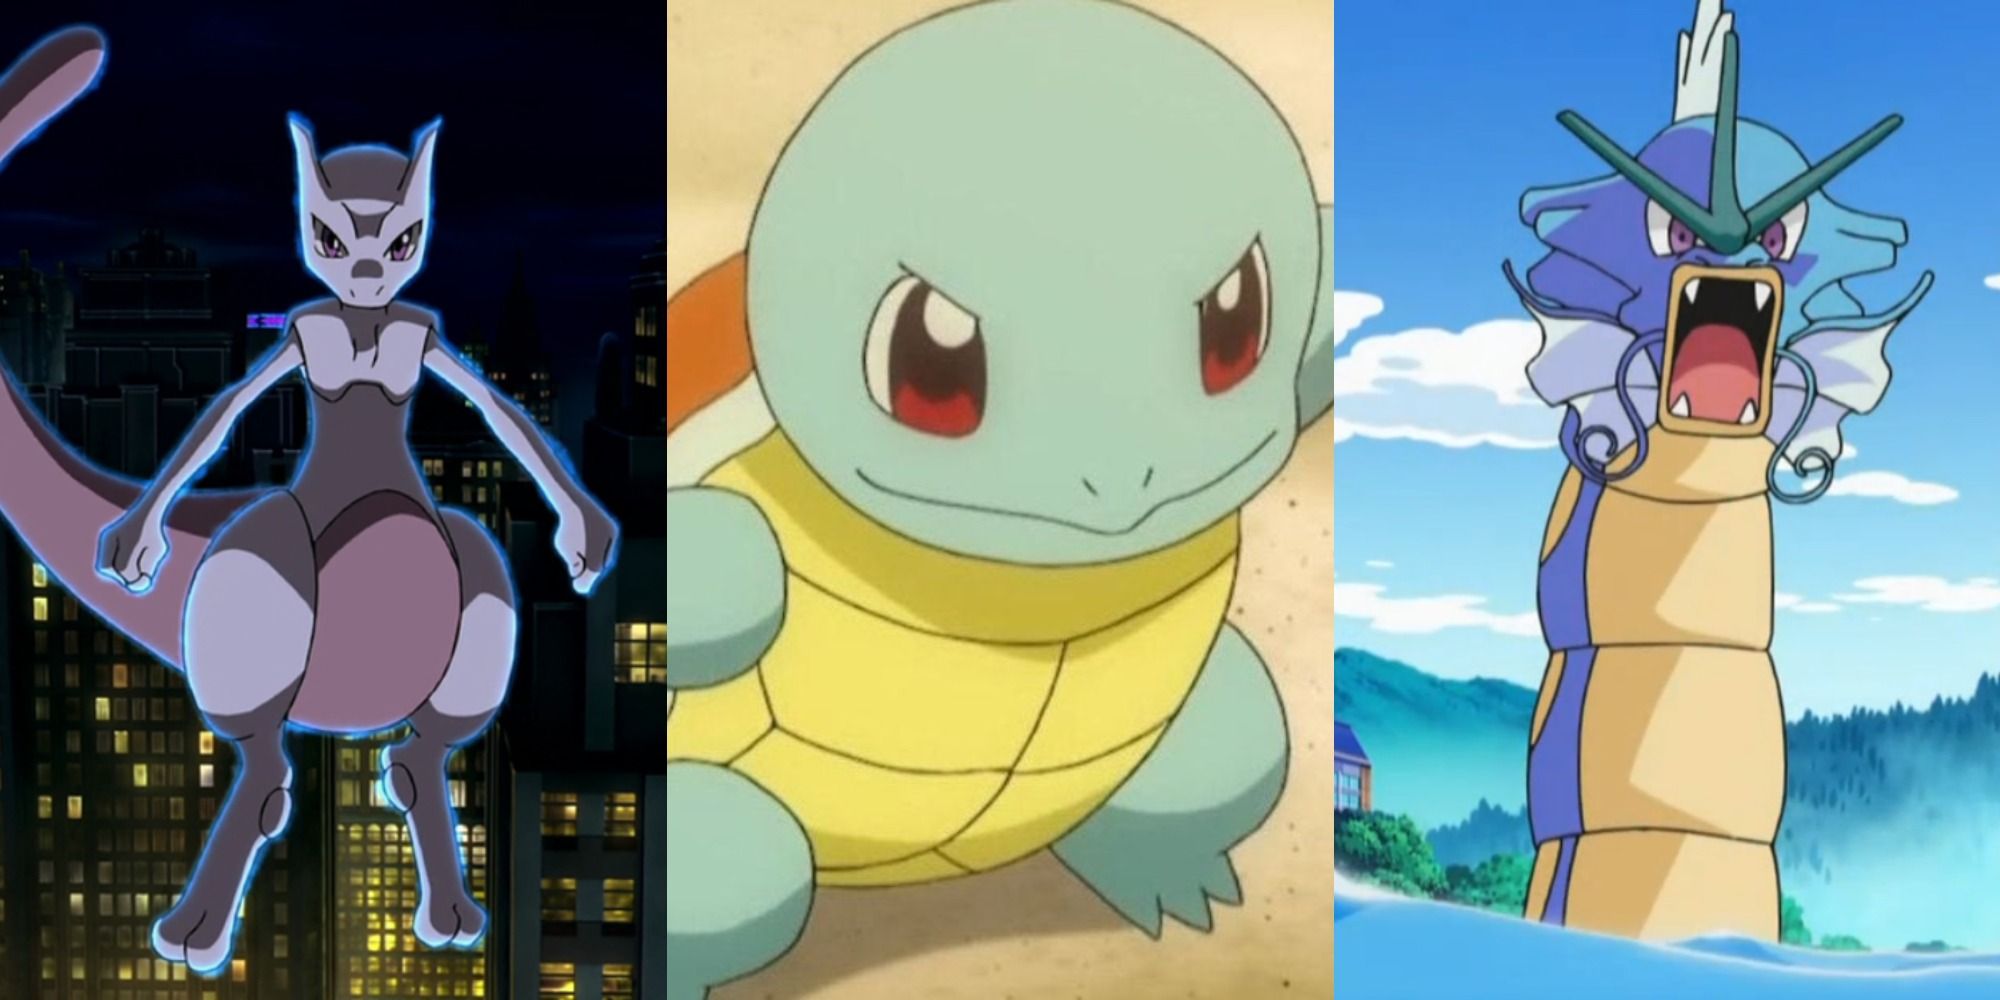 A split image of Mewtwo, Squirtle, and Gyarados